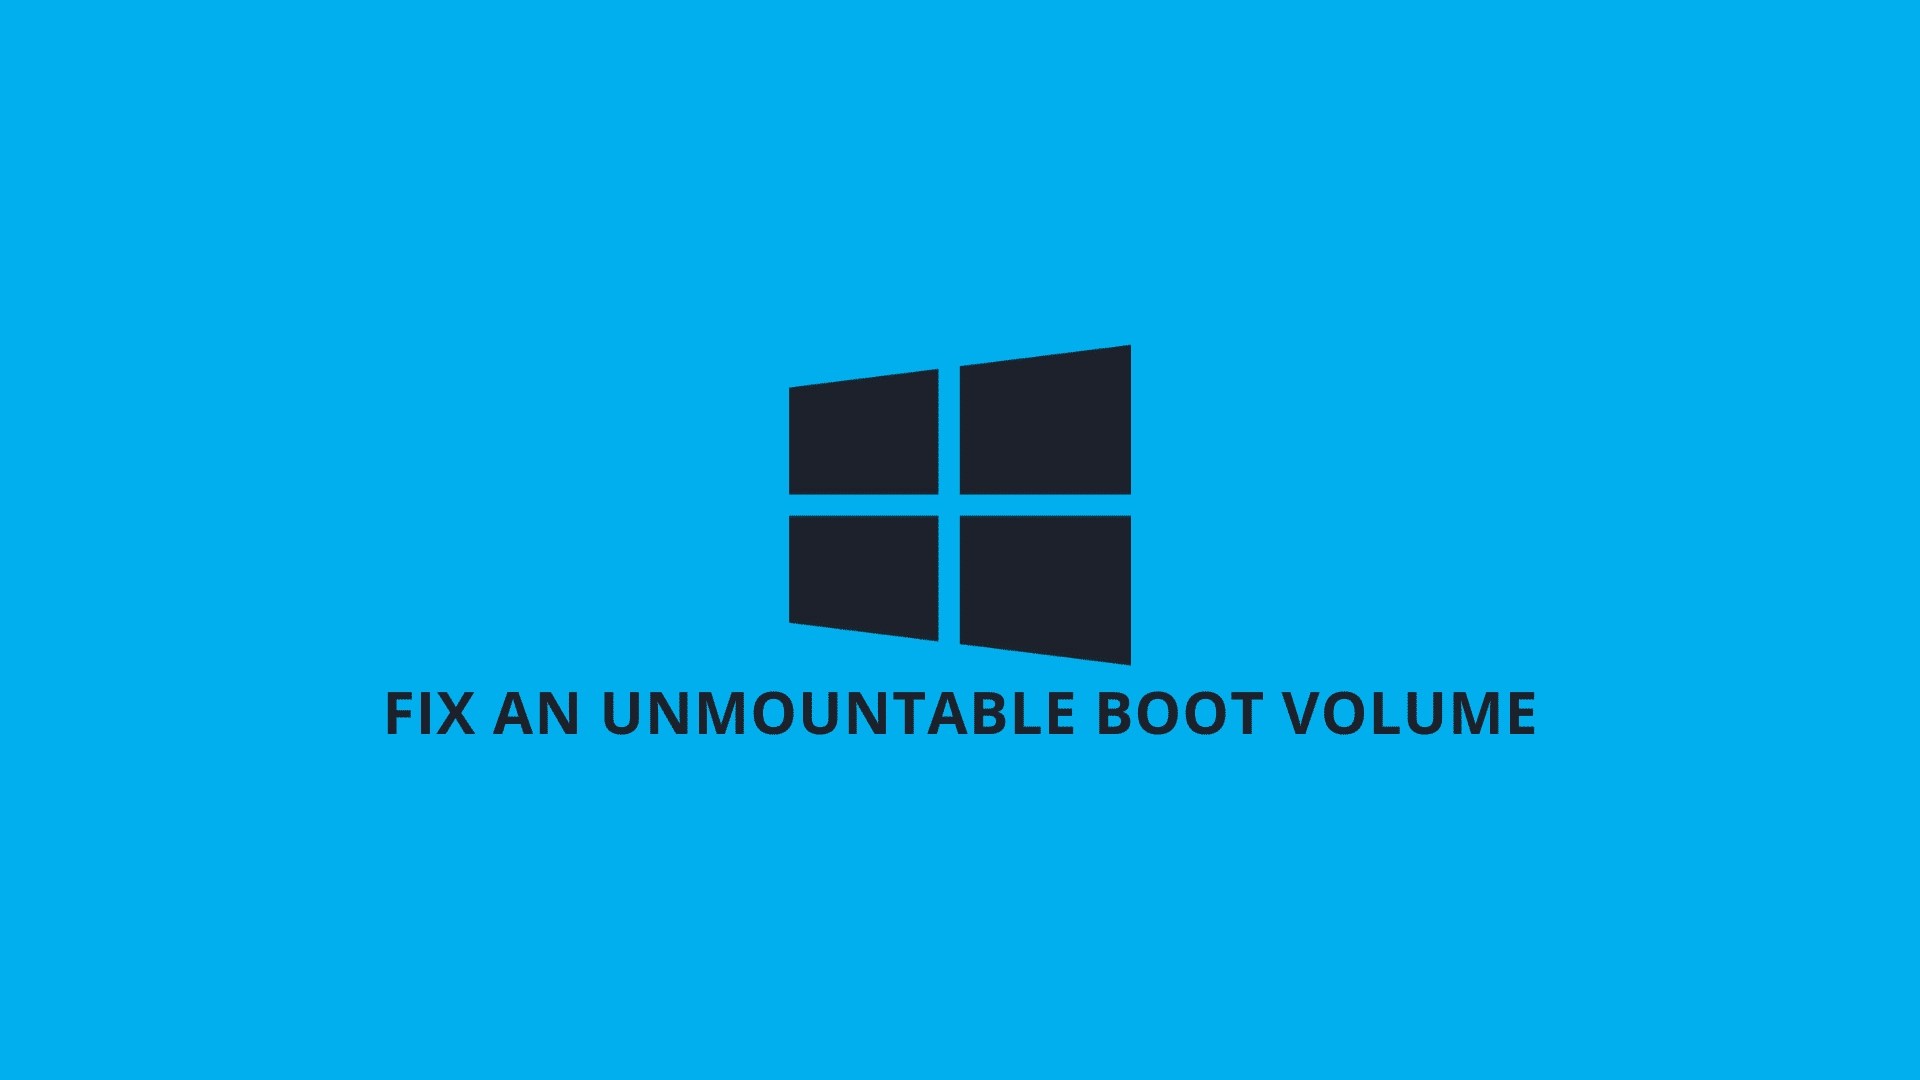 How to Fix Unmountable Boot Volume in Windows 10 or 11